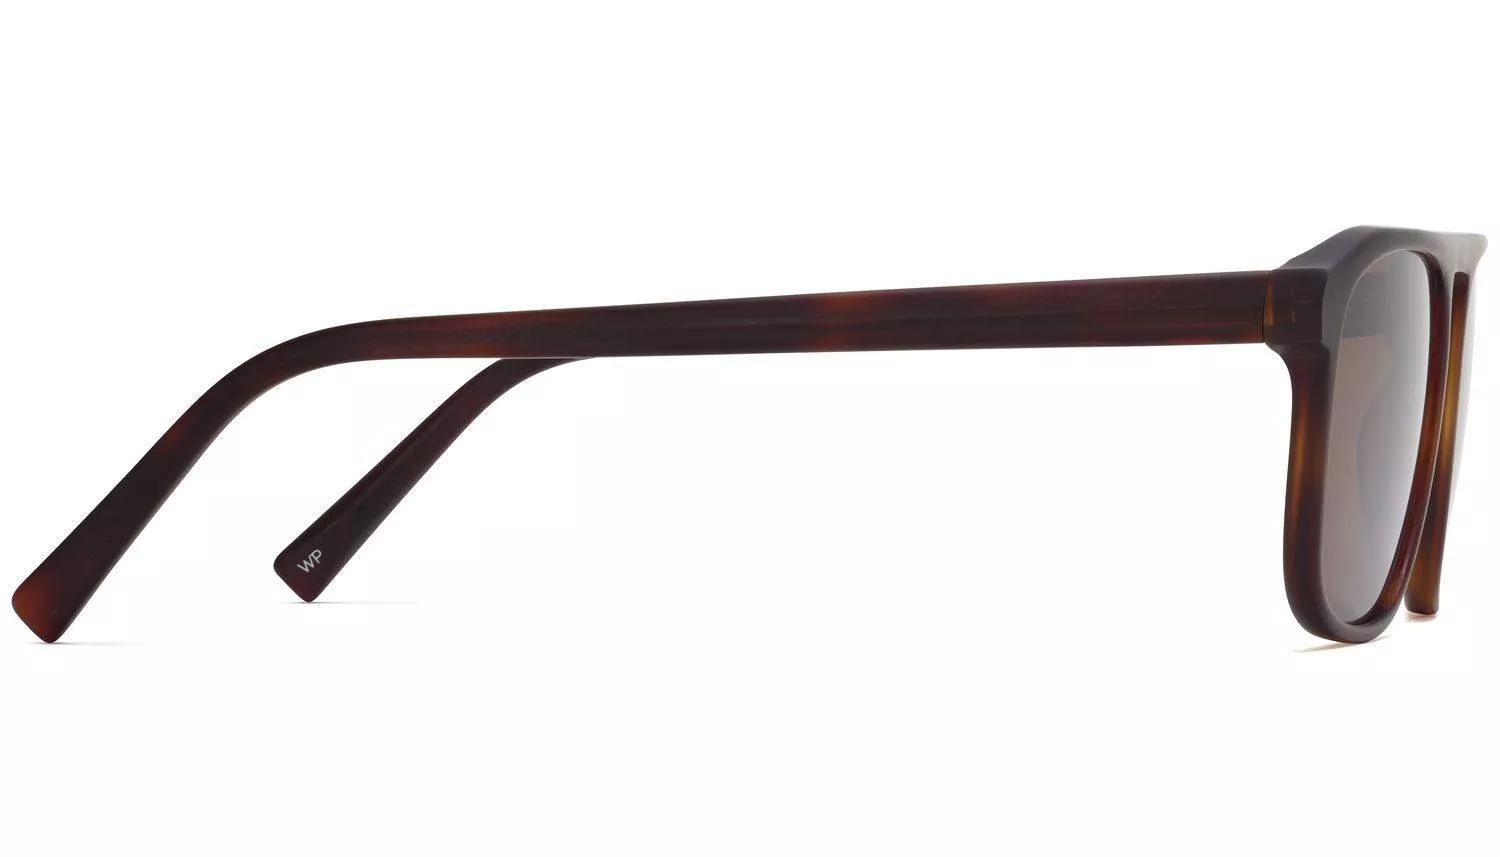 Side View Image of Lyon Sunglasses Collection, by Warby Parker Brand, in Rye Tortoise Matte Color